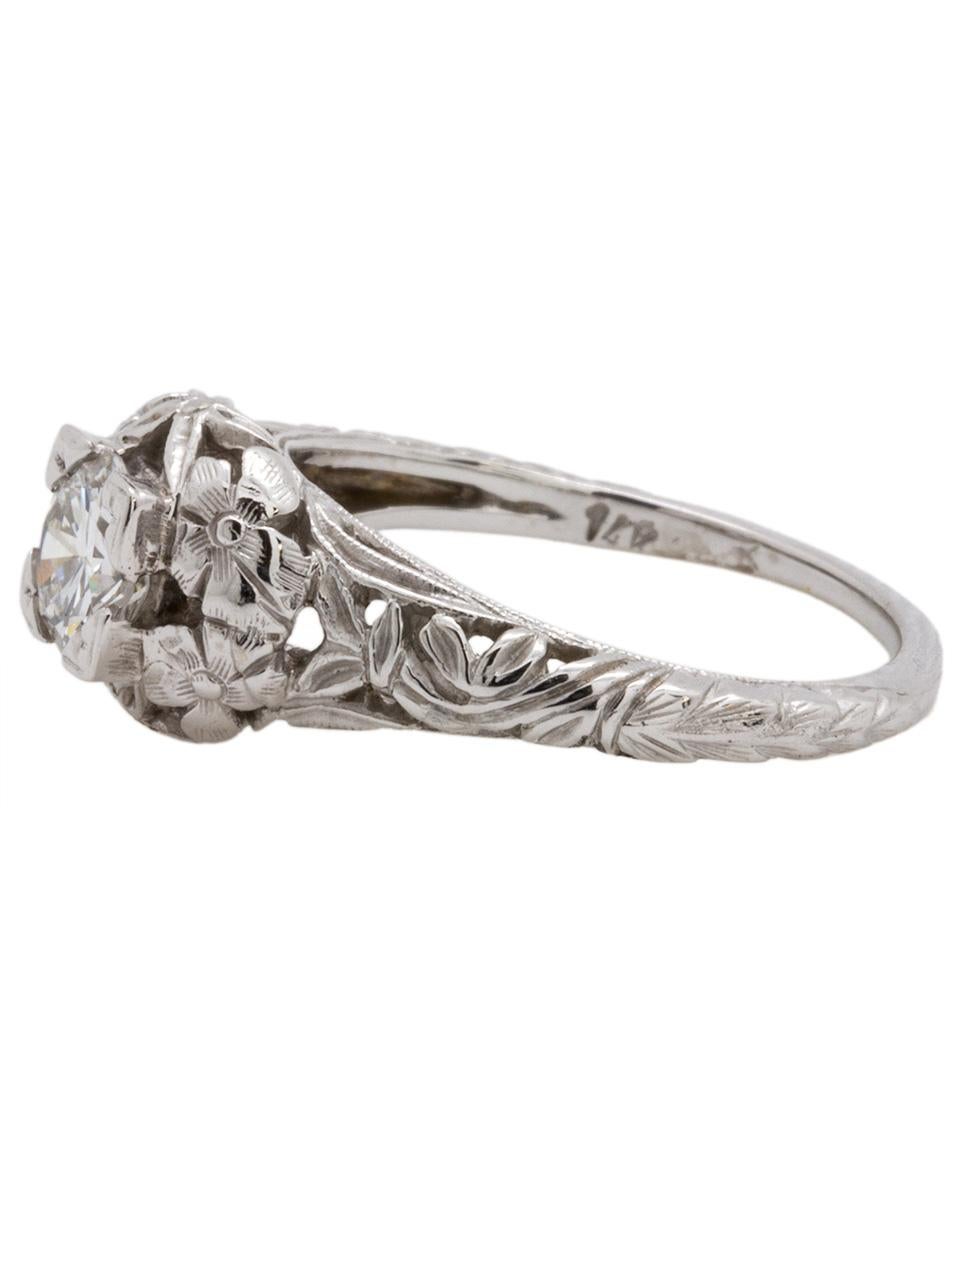 
Beautiful, vintage style modern 14K white gold floral engraved solitaire engagement ring set with 0.53ct round brilliant cut diamond with exceptional E color (colorless) and VS2 clarity. Gorgeous detailed carved flower design with wheat grain